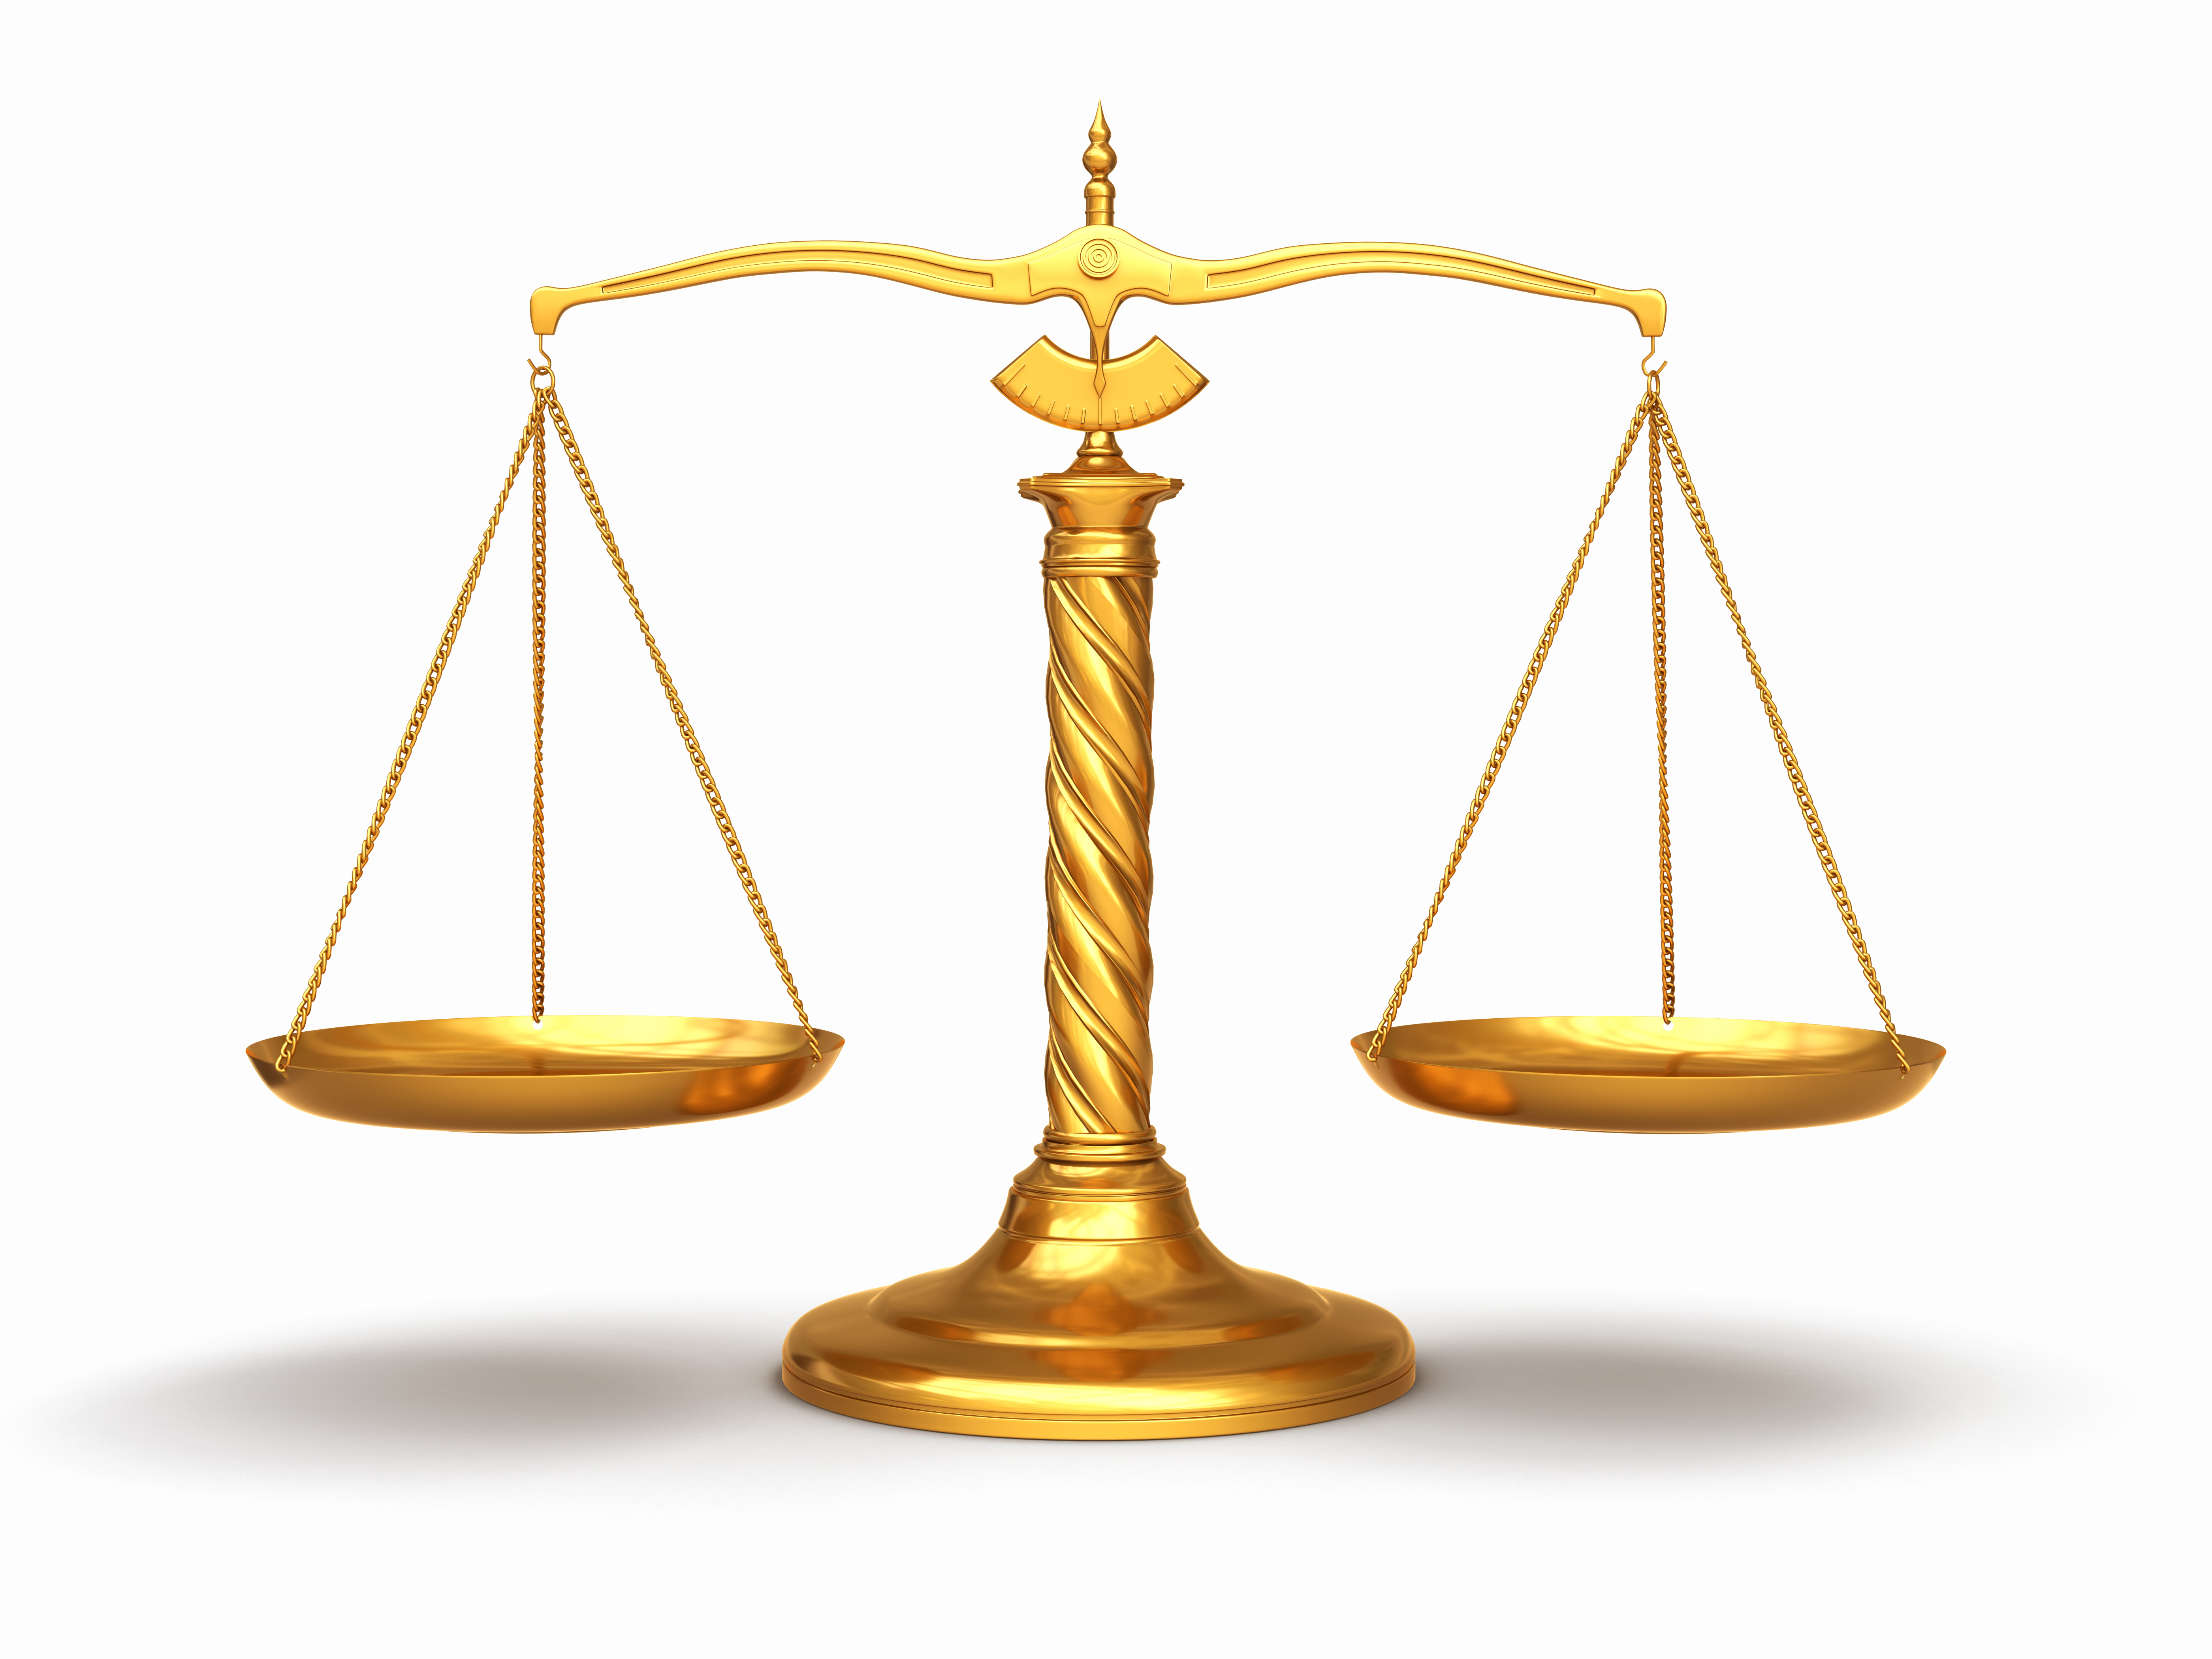 Lawyer Scale Clipart Png